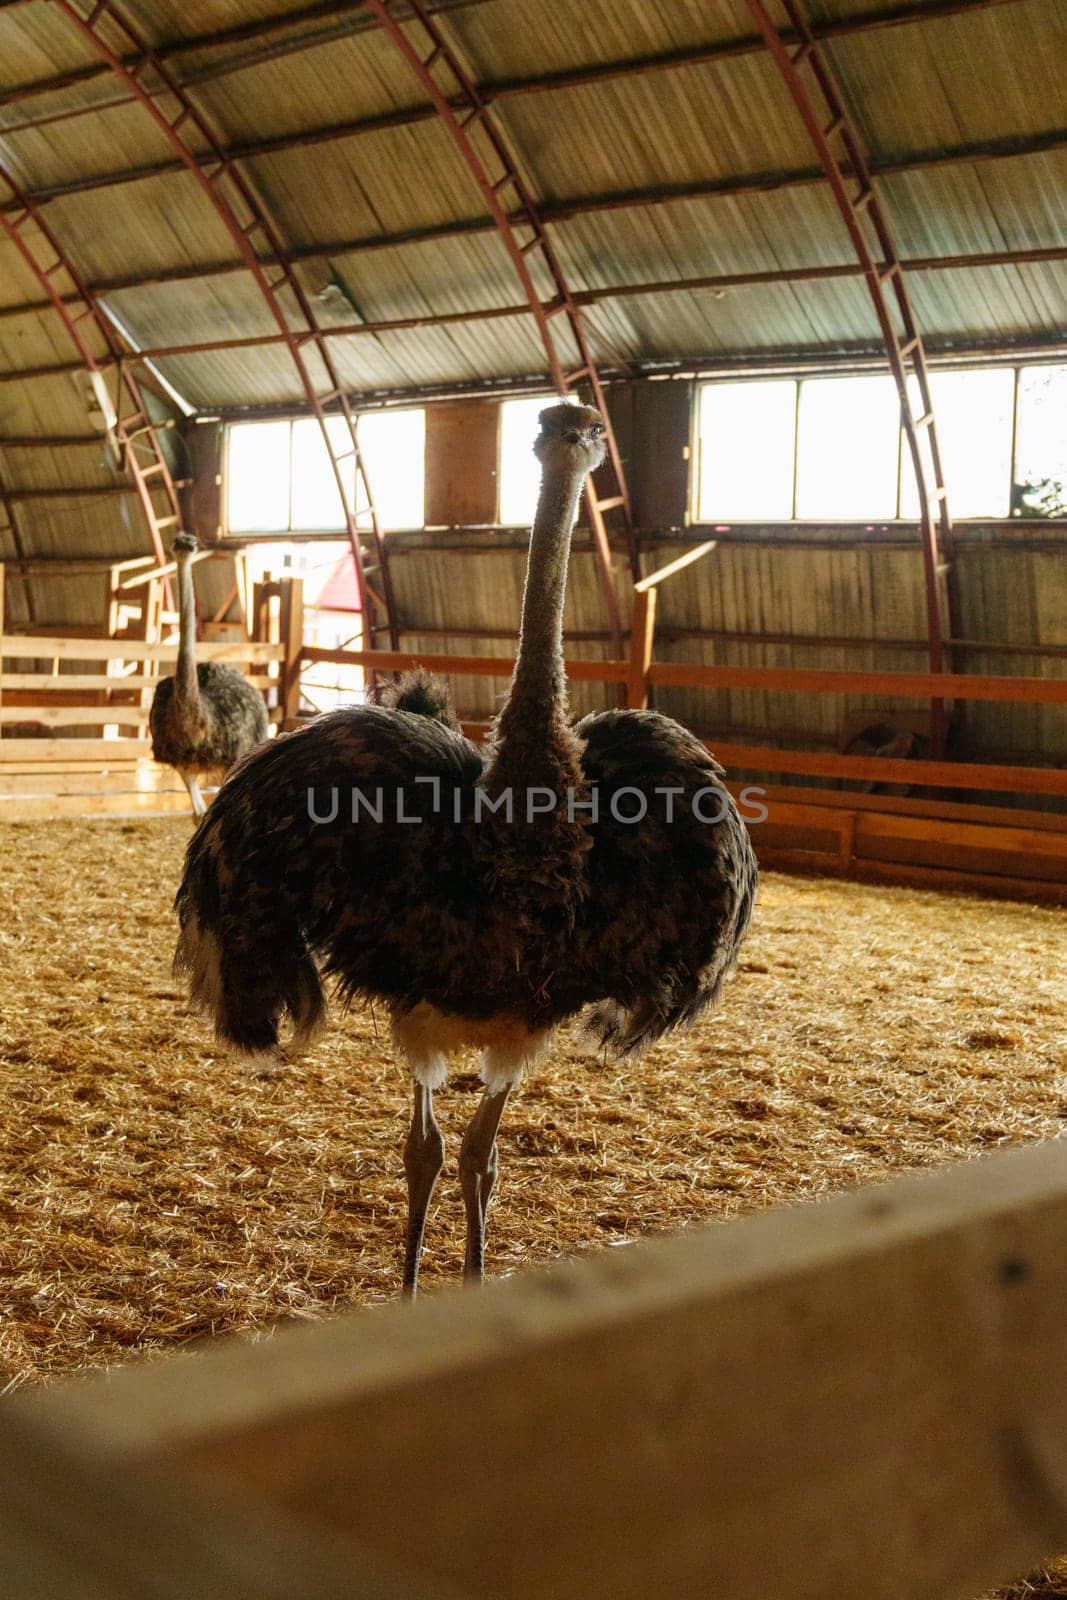 Ostrich stands tall in a spacious pen on farm, showcasing its long neck and vibrant feathers. Vertical photo by darksoul72